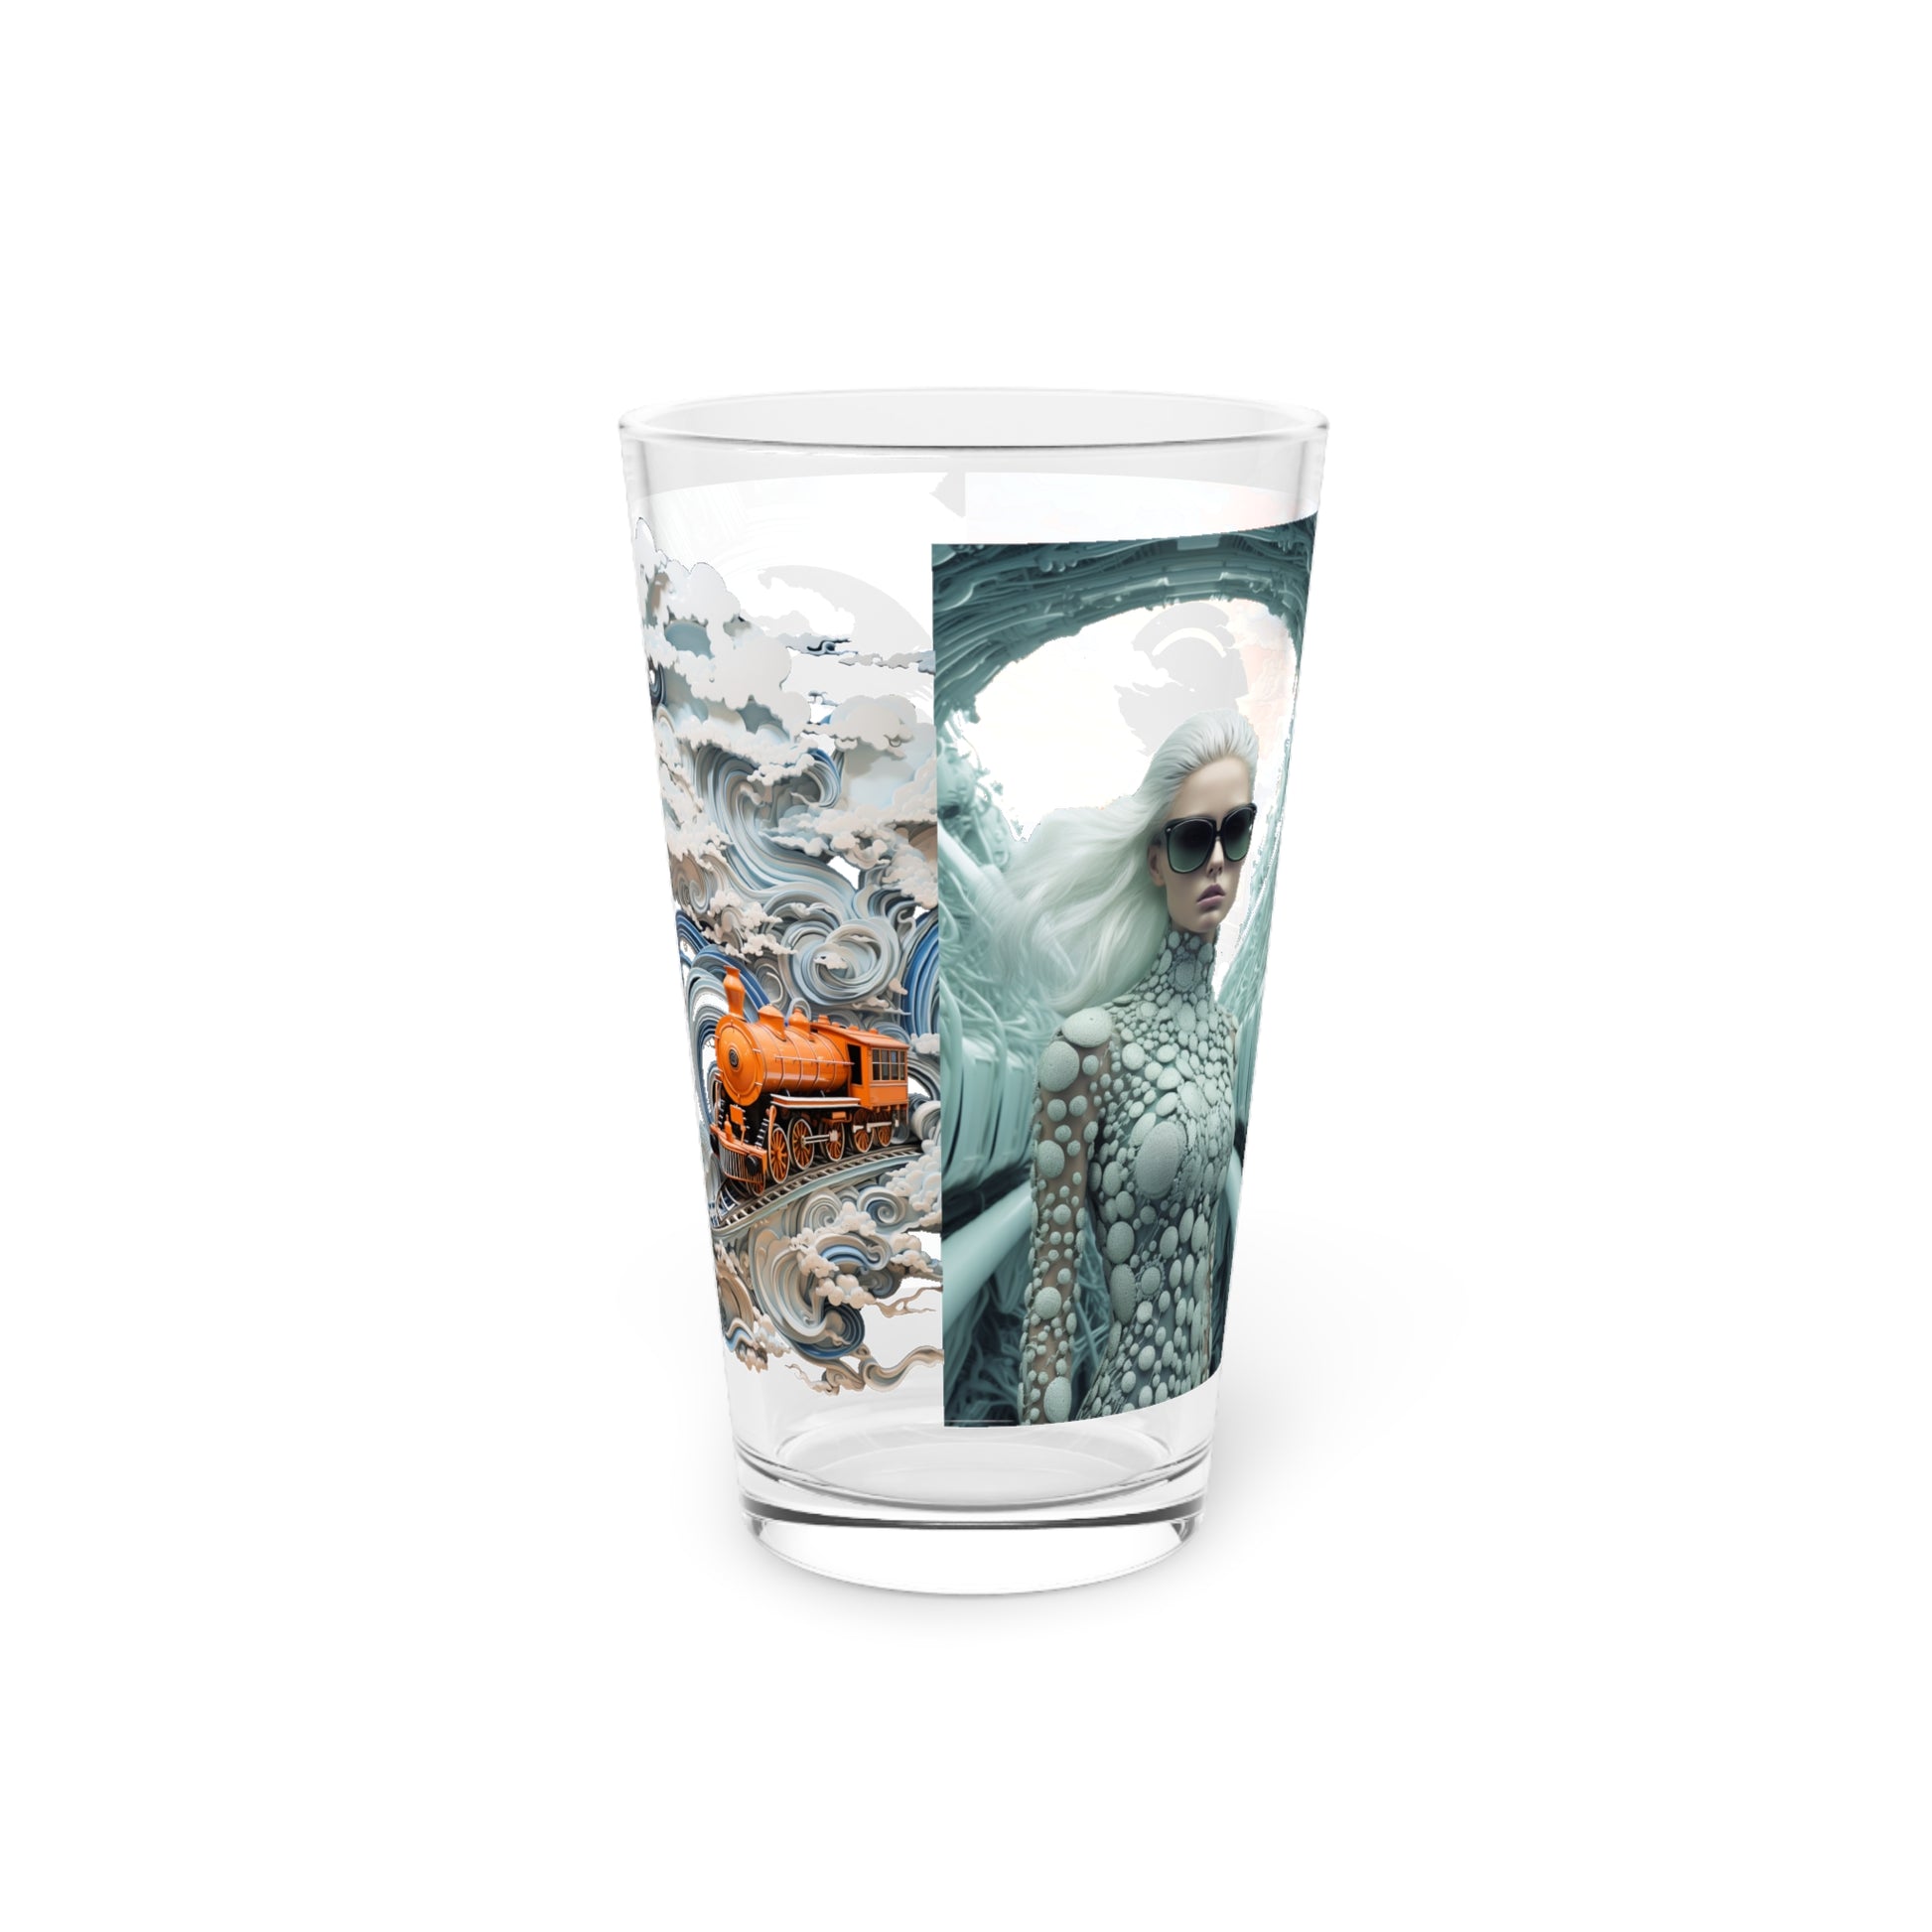 Collectible Glassware: Intriguing Train and Ocean Waves Art